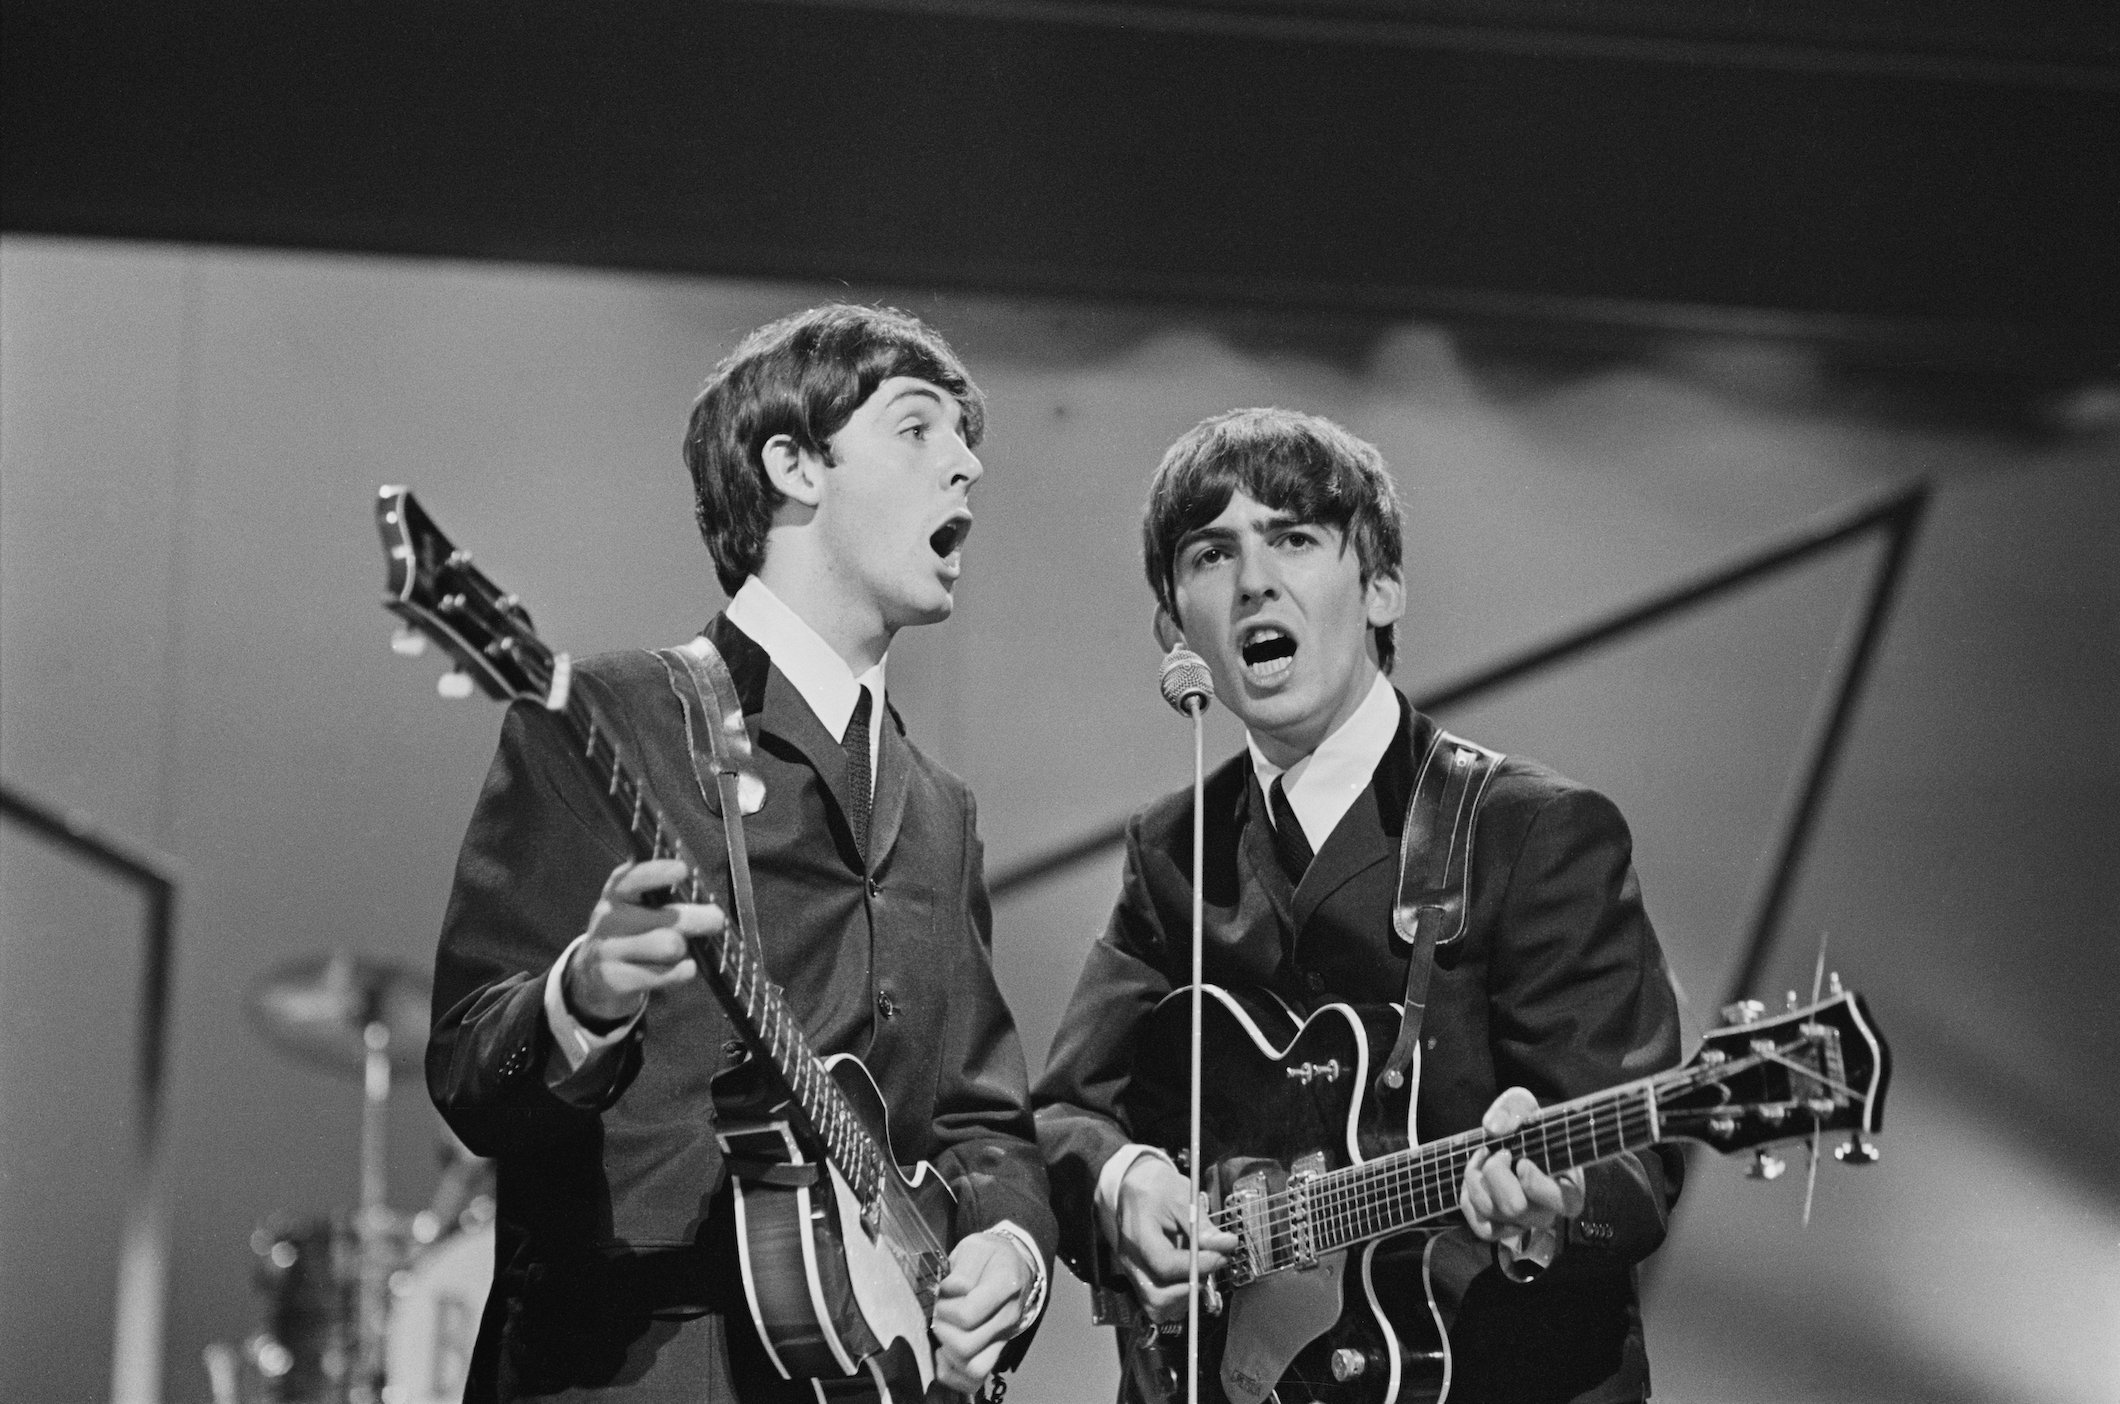 Paul McCartney and George Harrison of The Beatles perform at The London Palladium